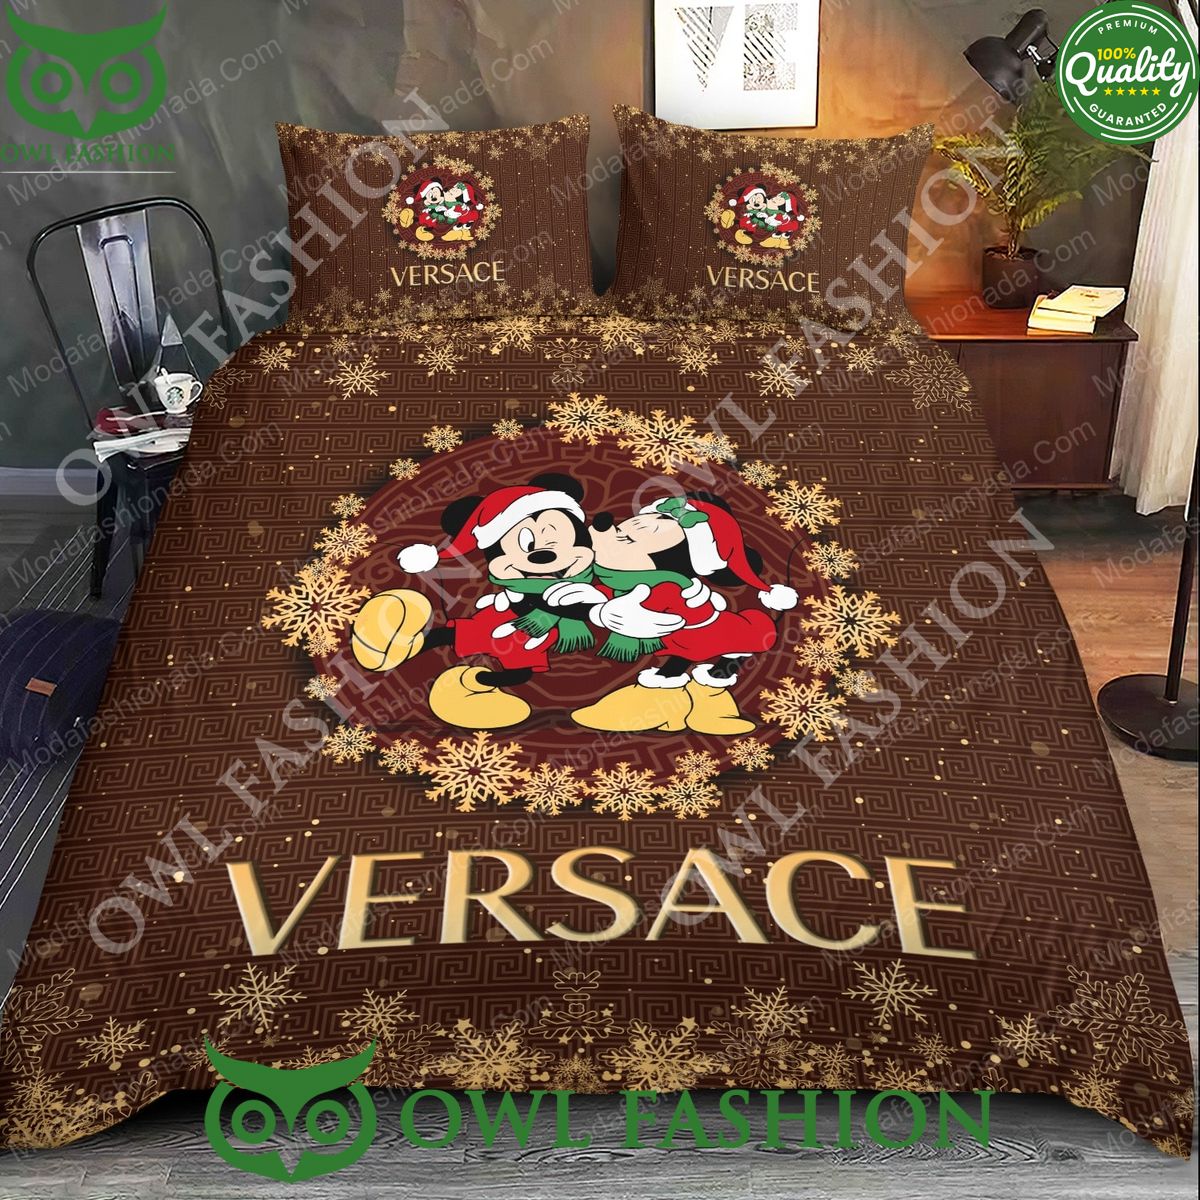 Mickey And Minnie Versace Merry Christmas Limited Bedding Set Looking so nice